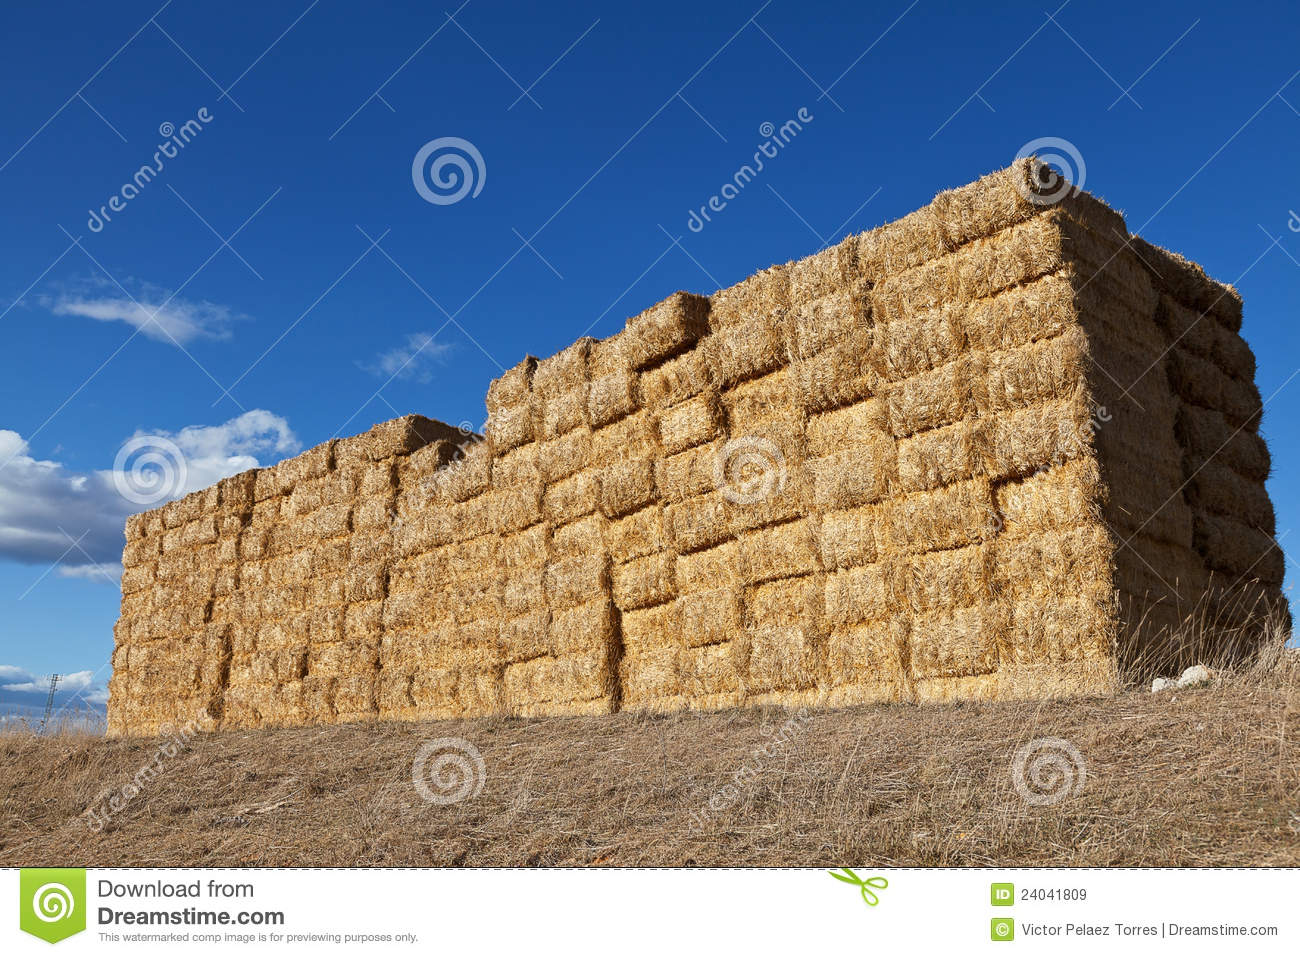 Large Pile Of Hay Bales Royalty Free Stock Images   Image  24041809